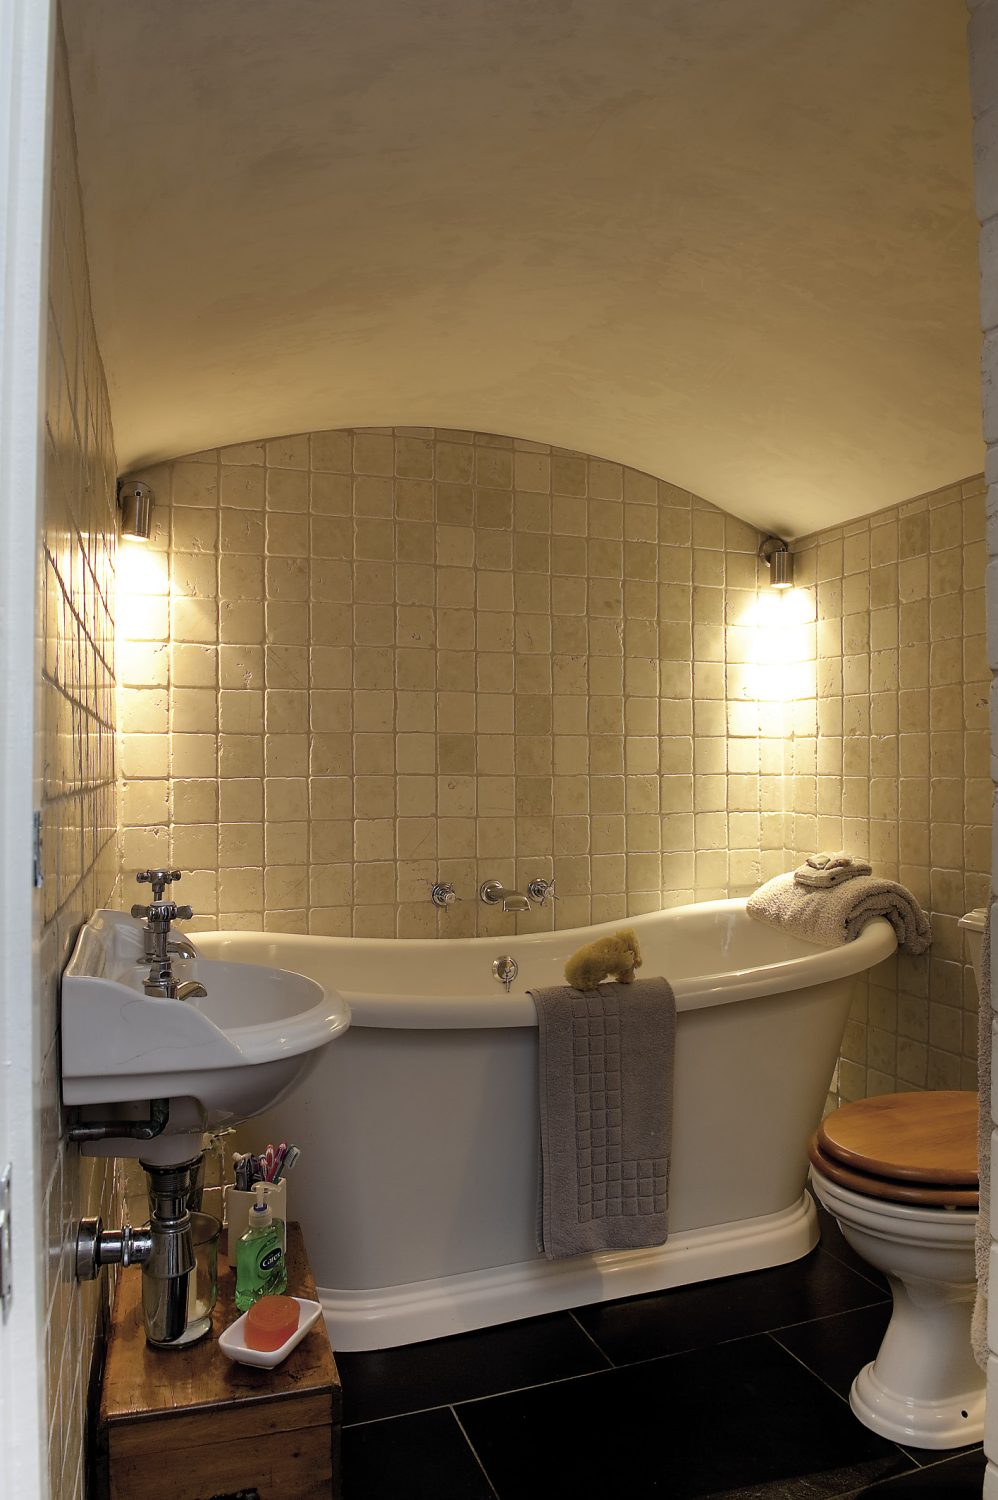 Housed in the former coal chute, the curved ceiling of the bathroom has been retained, so that with the huge freestanding bath and the limestone mosaic tiles, the room has more than a hint of the Roman baths about it.